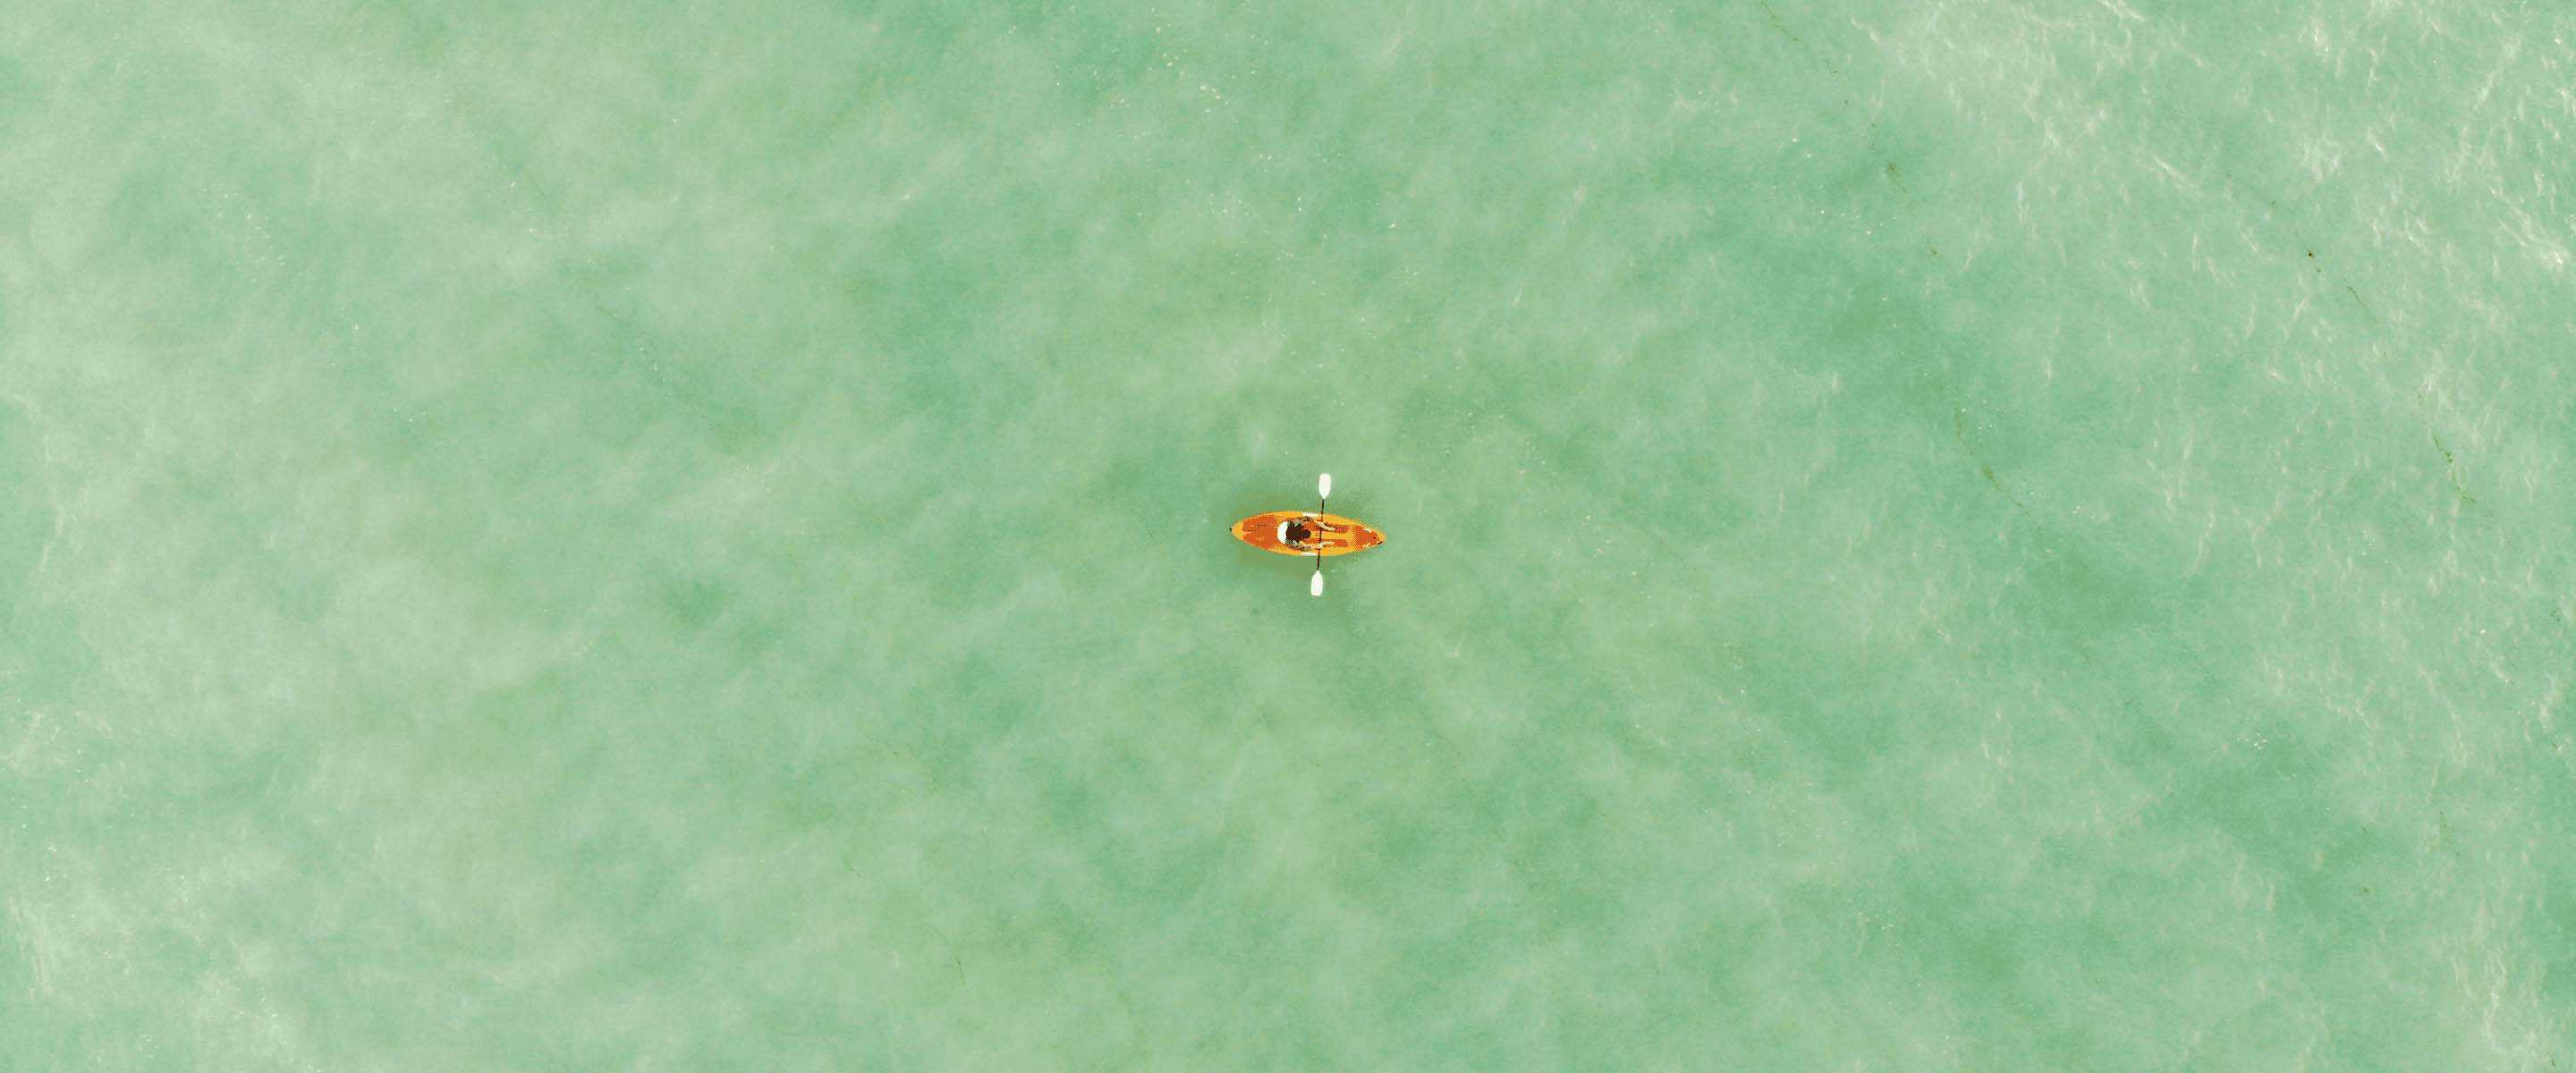 An aerial view of a kayak in water.